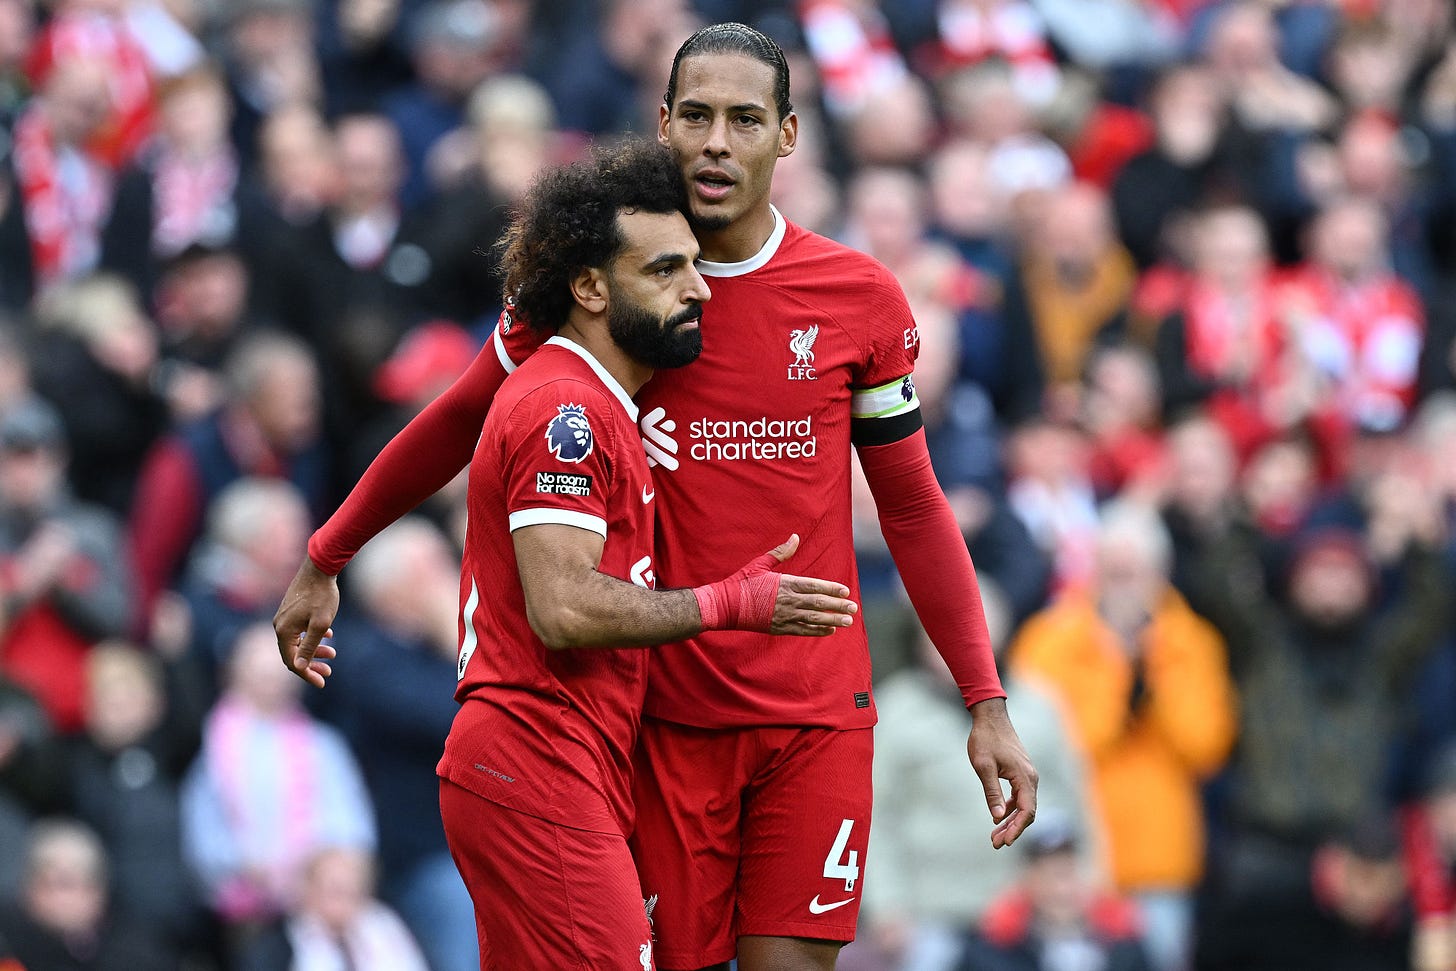 Mohamed Salah is embraced by Virgil van Dijk as the red-shirted Liverpool duo celebrate their side's win over Everton